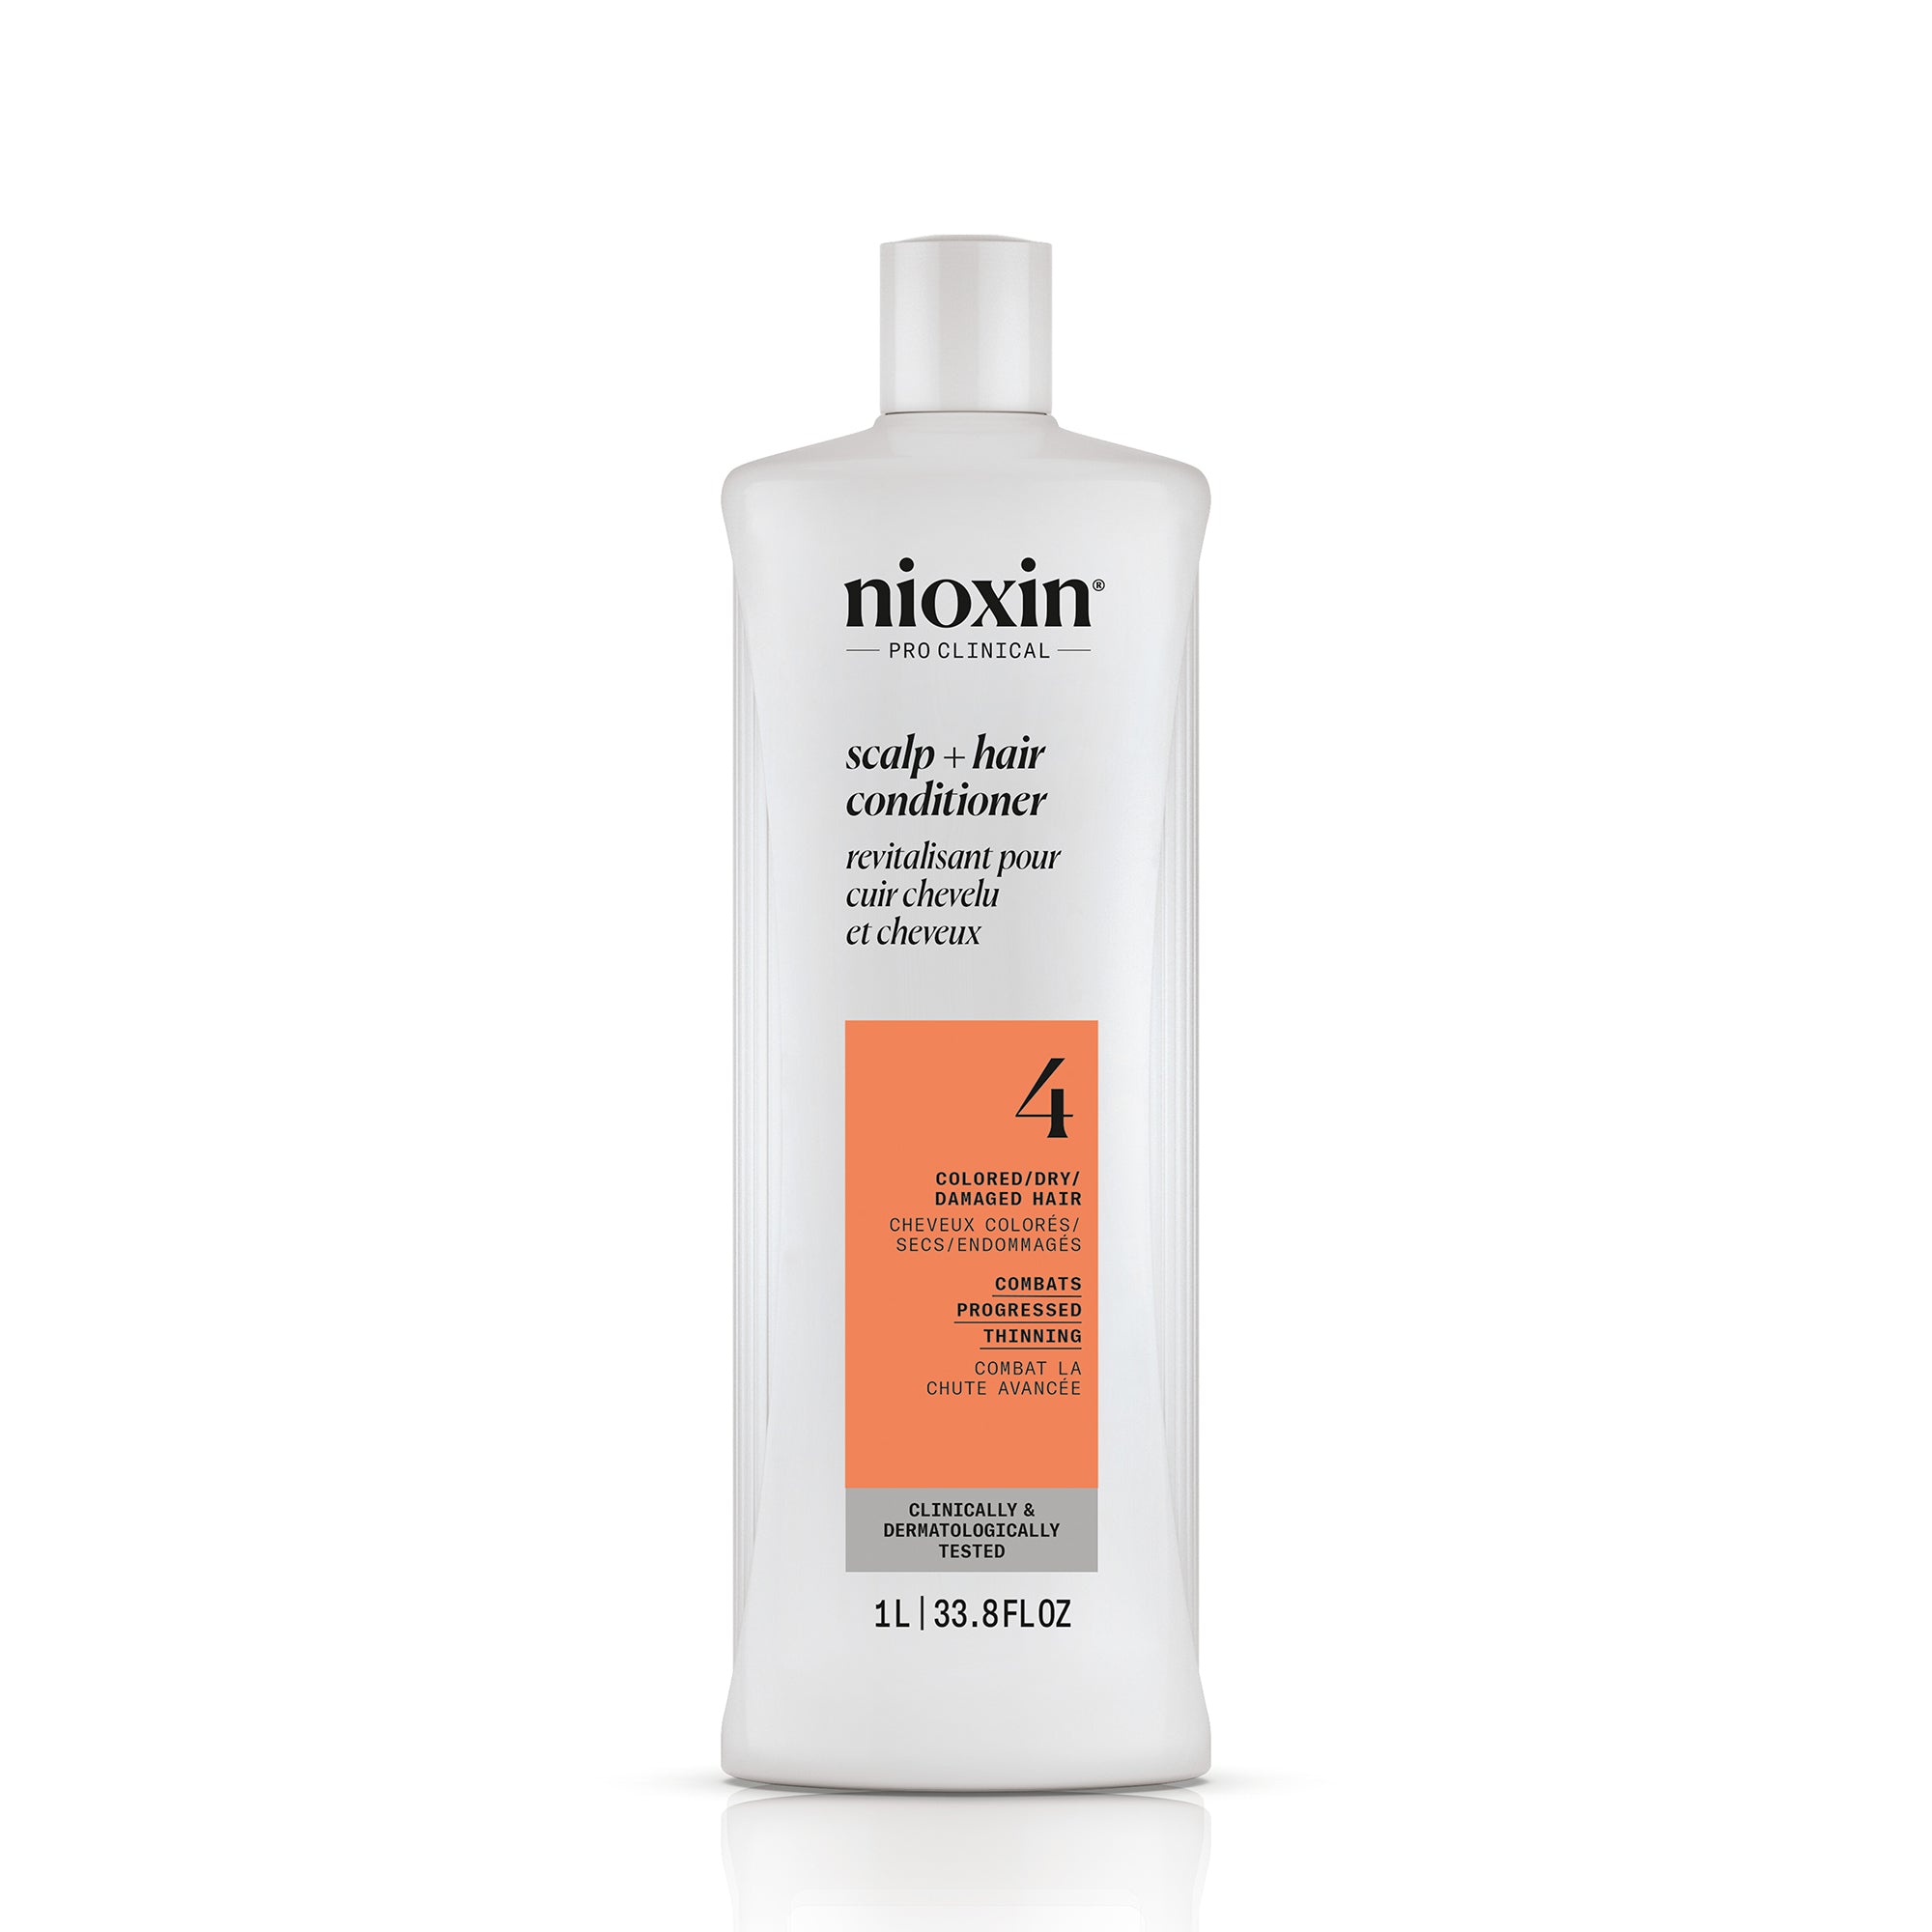 Nioxin System 4 Scalp + Hair Shampoo and Conditioner Liter Duo ($104 Value) / 33.8OZ